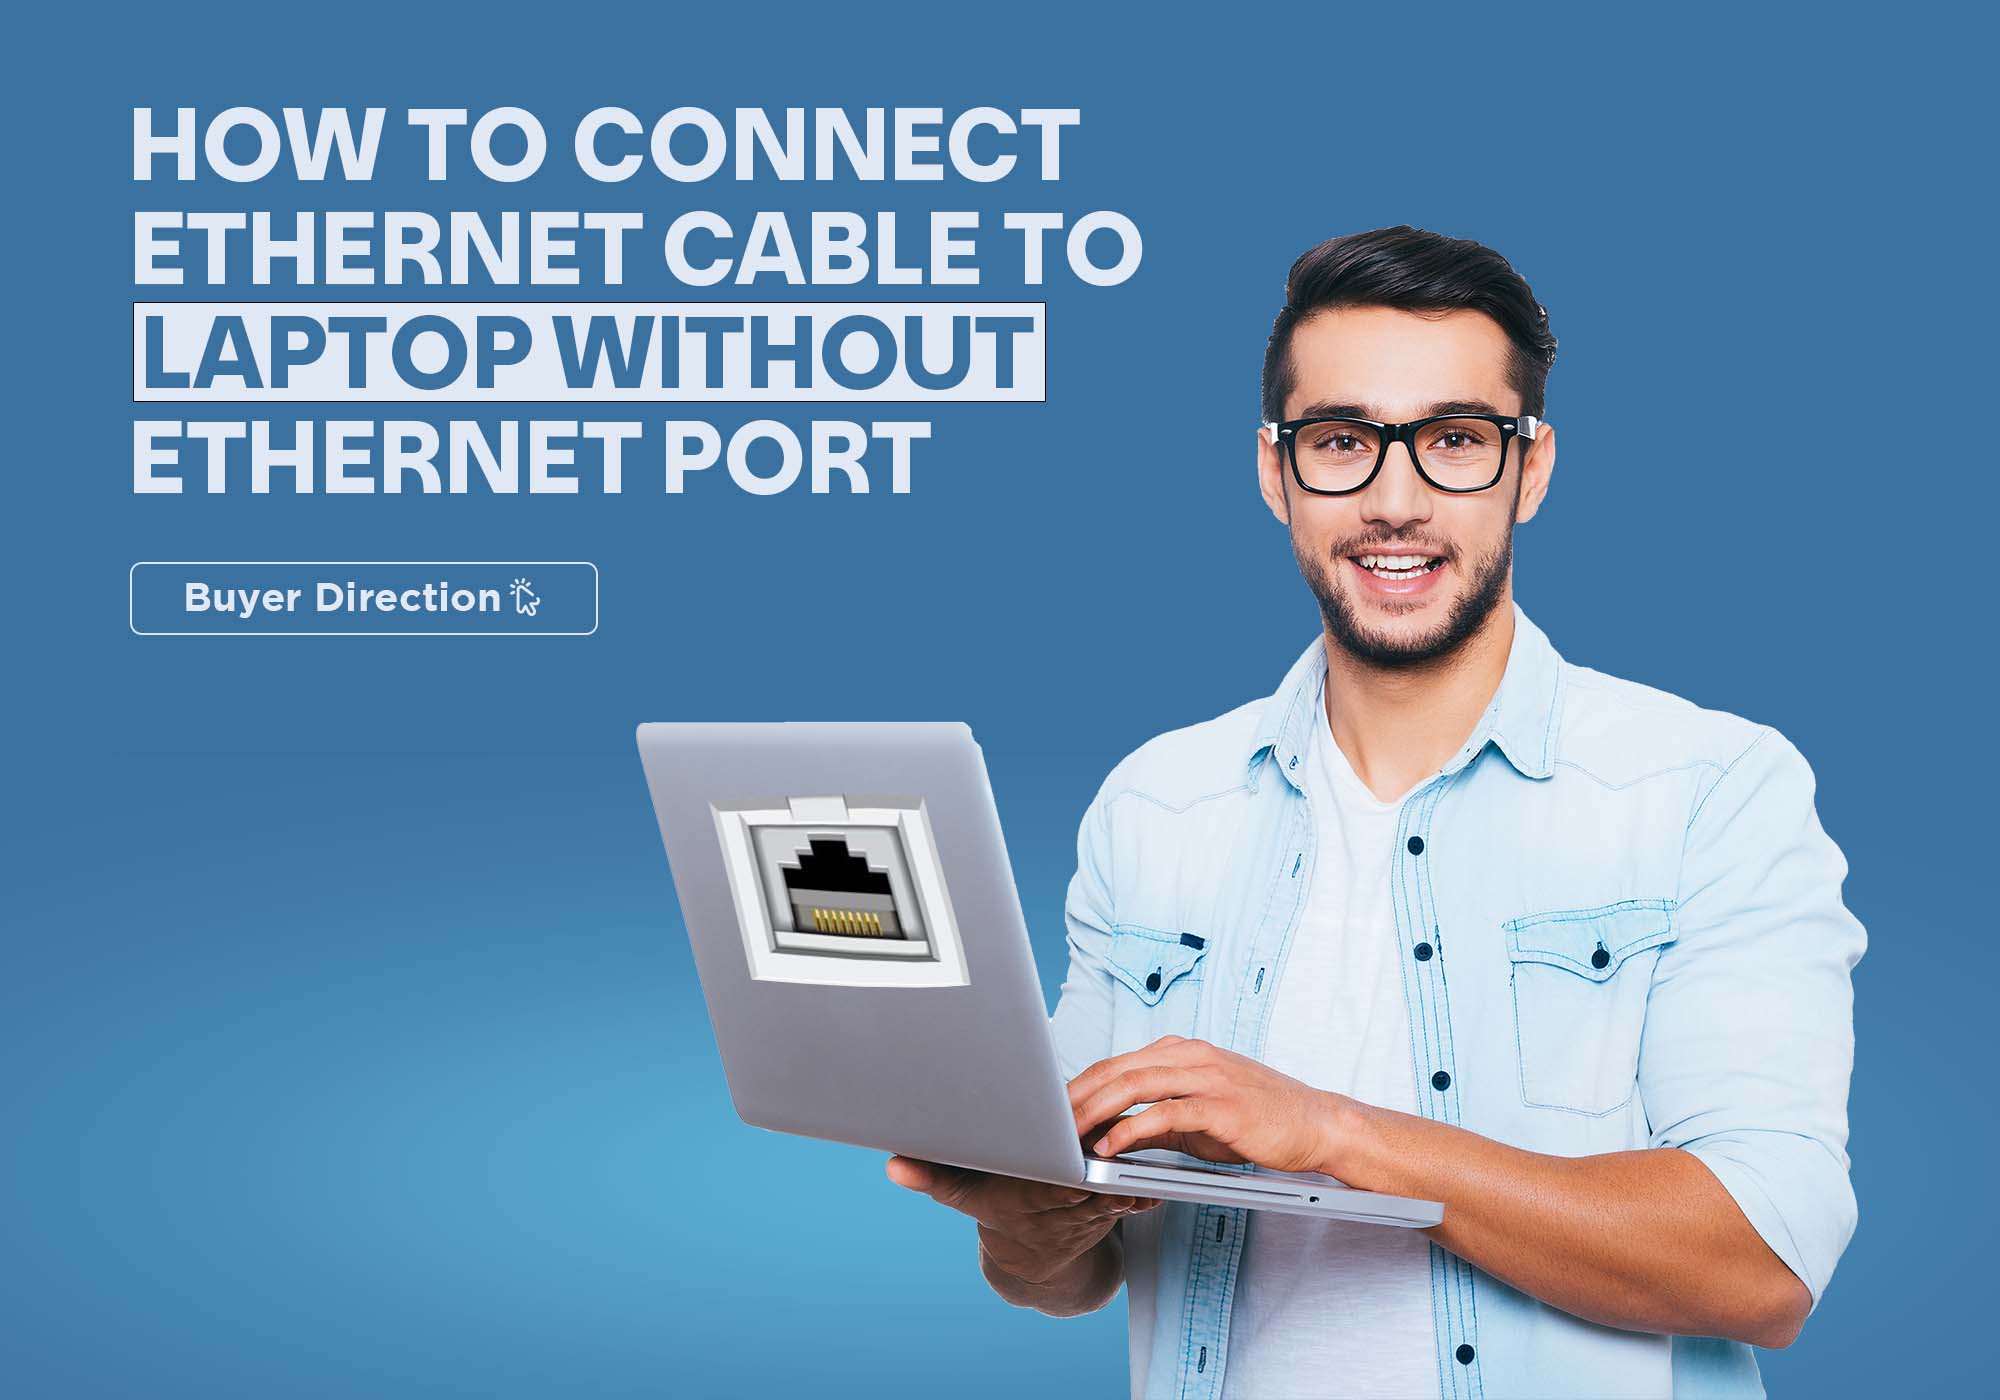 How To Connect Ethernet Cable To Laptop Without Ethernet Port